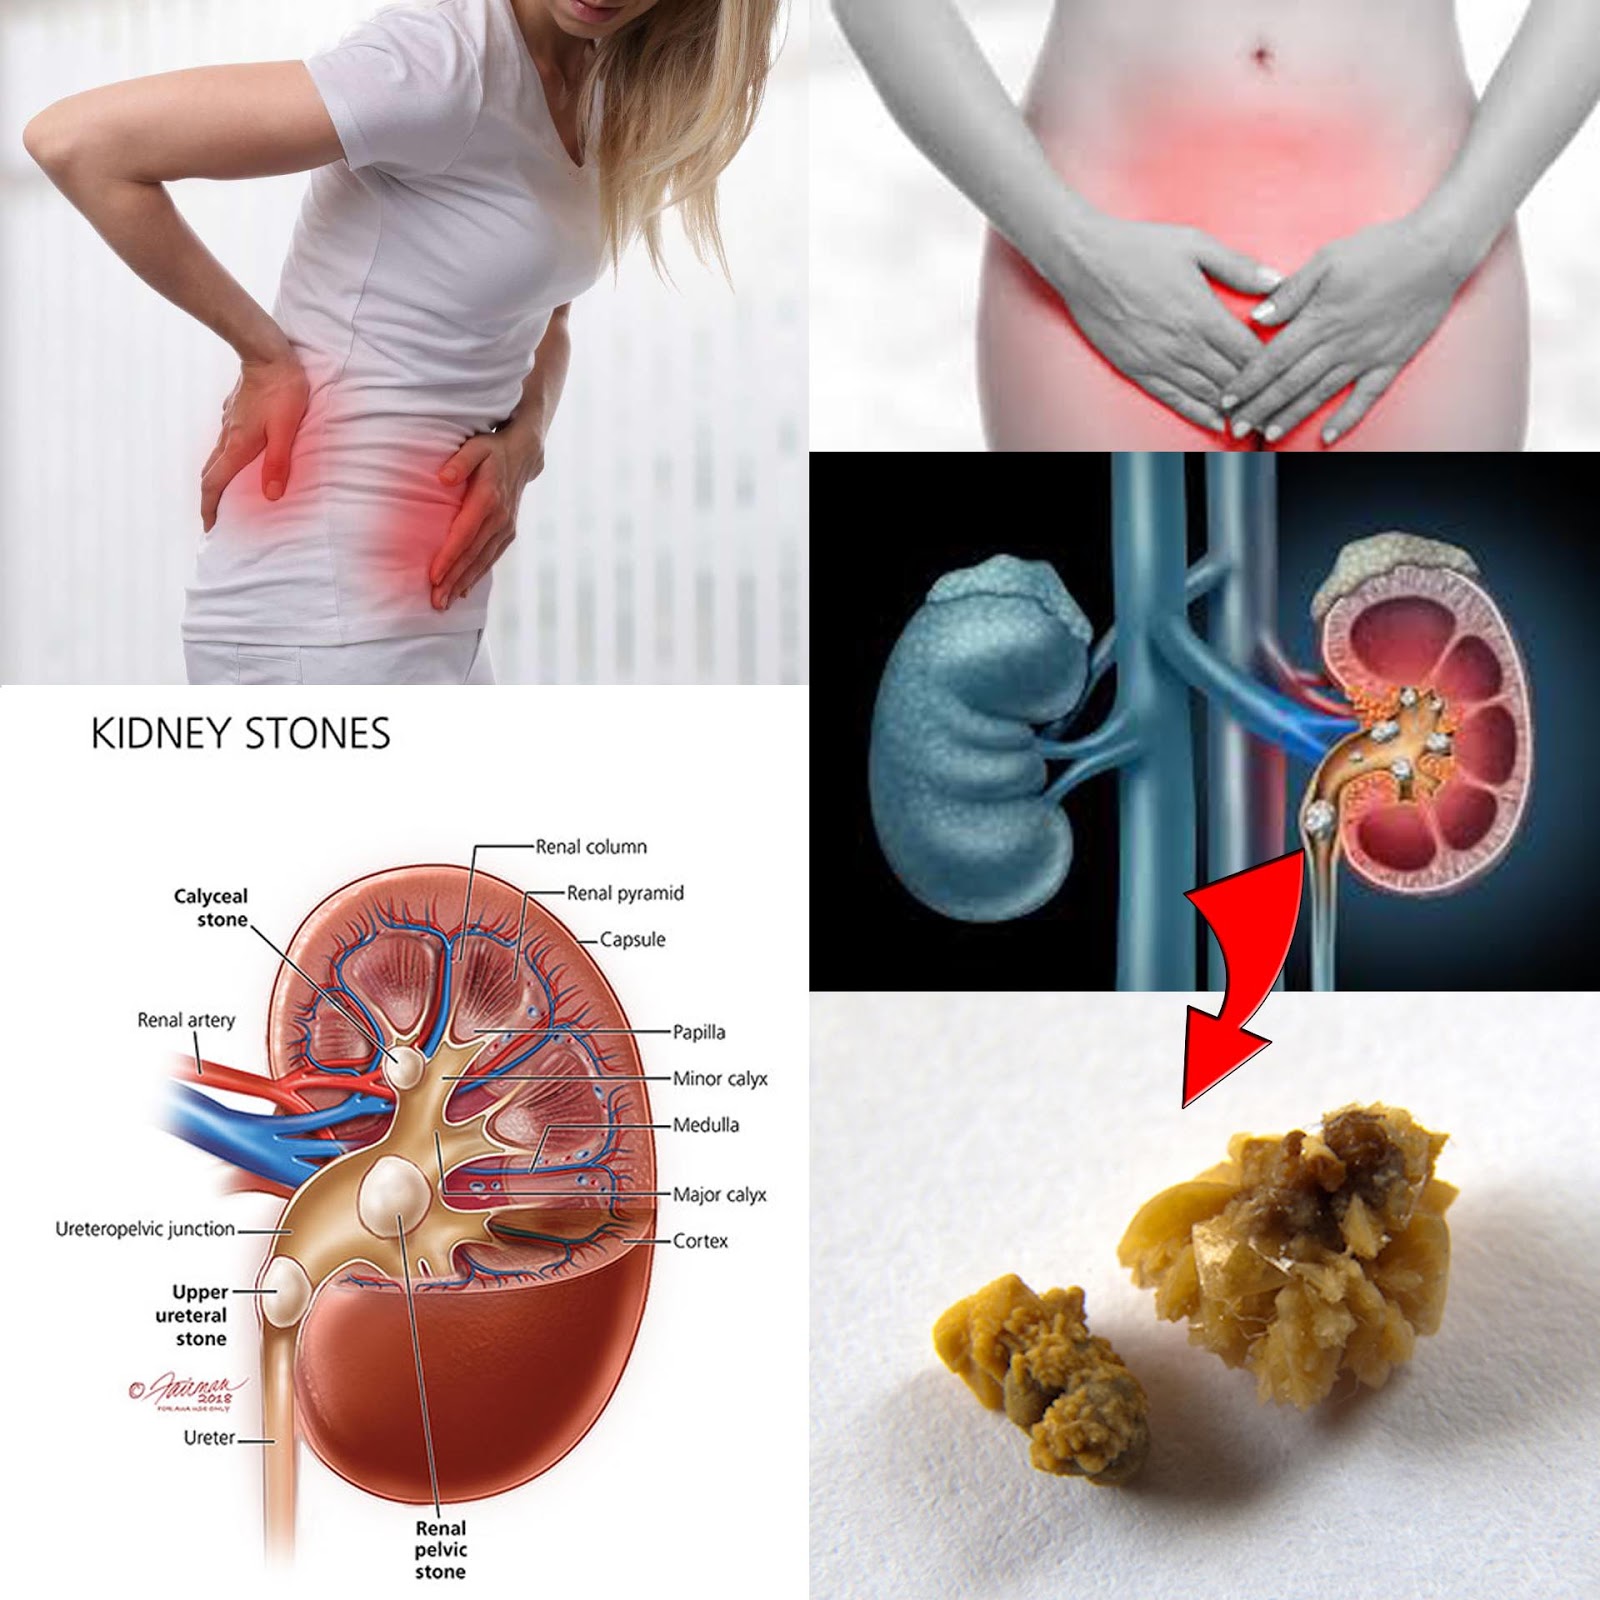 What Type Of Kidney Stones Show Up On Ultrasound